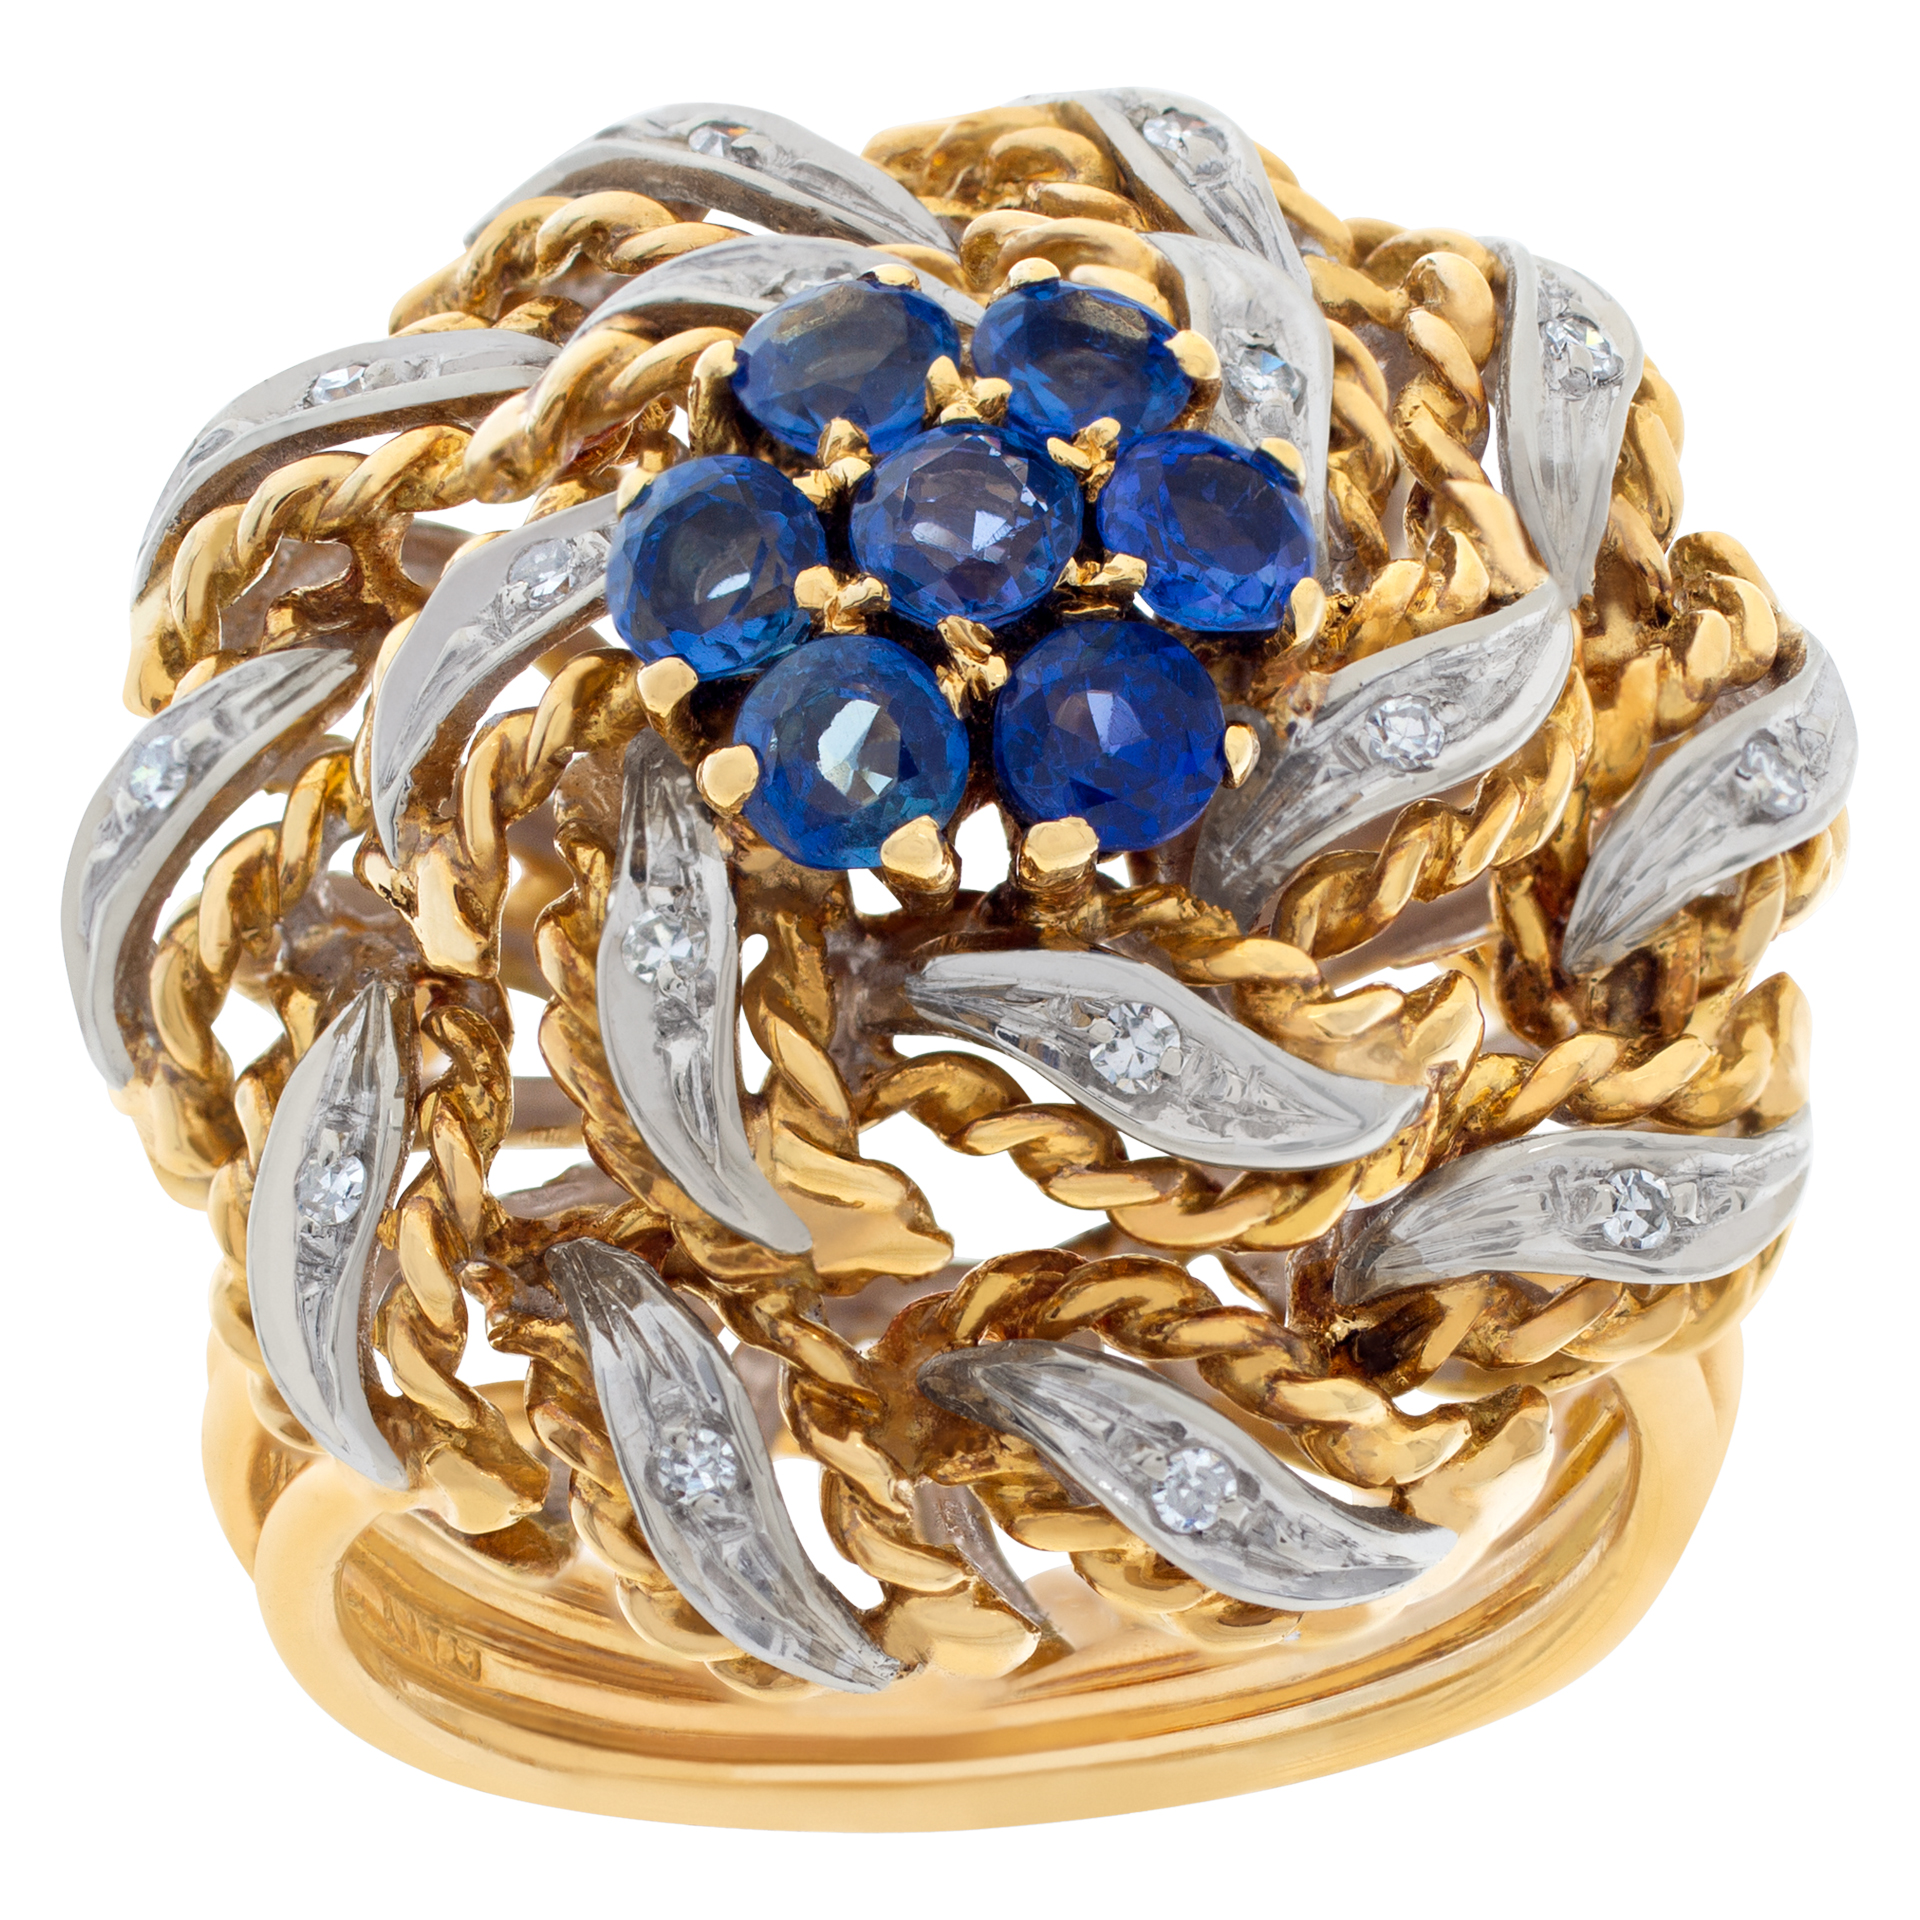 VIntage circa 1980's, Diamonds & Sapphire cocktail ring set in 18k white and yellow gold.